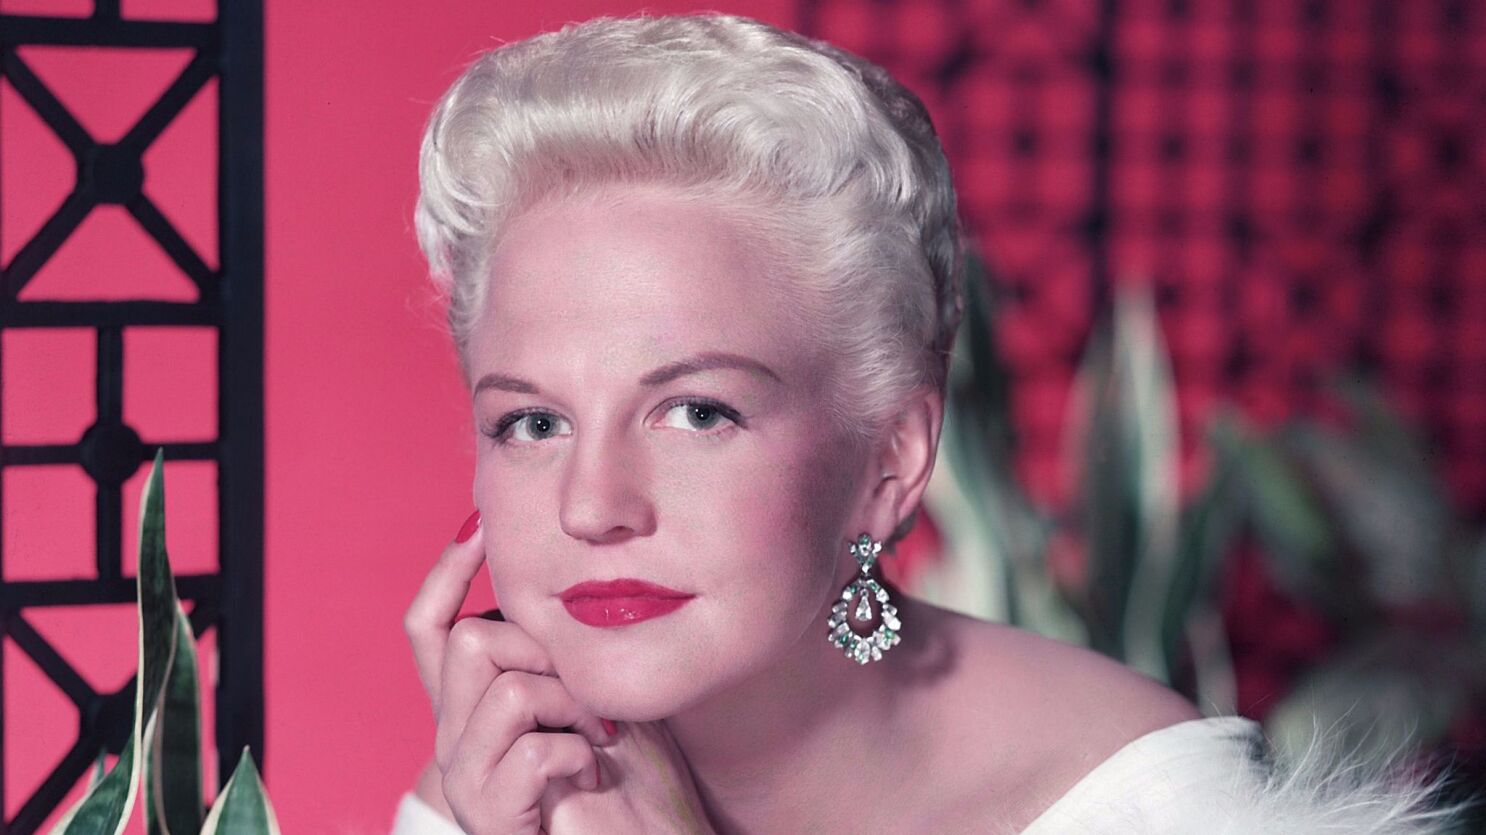 From the Archives: Peggy Lee, Sultry Jazz and Pop Singer, Dies at 81 - Los  Angeles Times